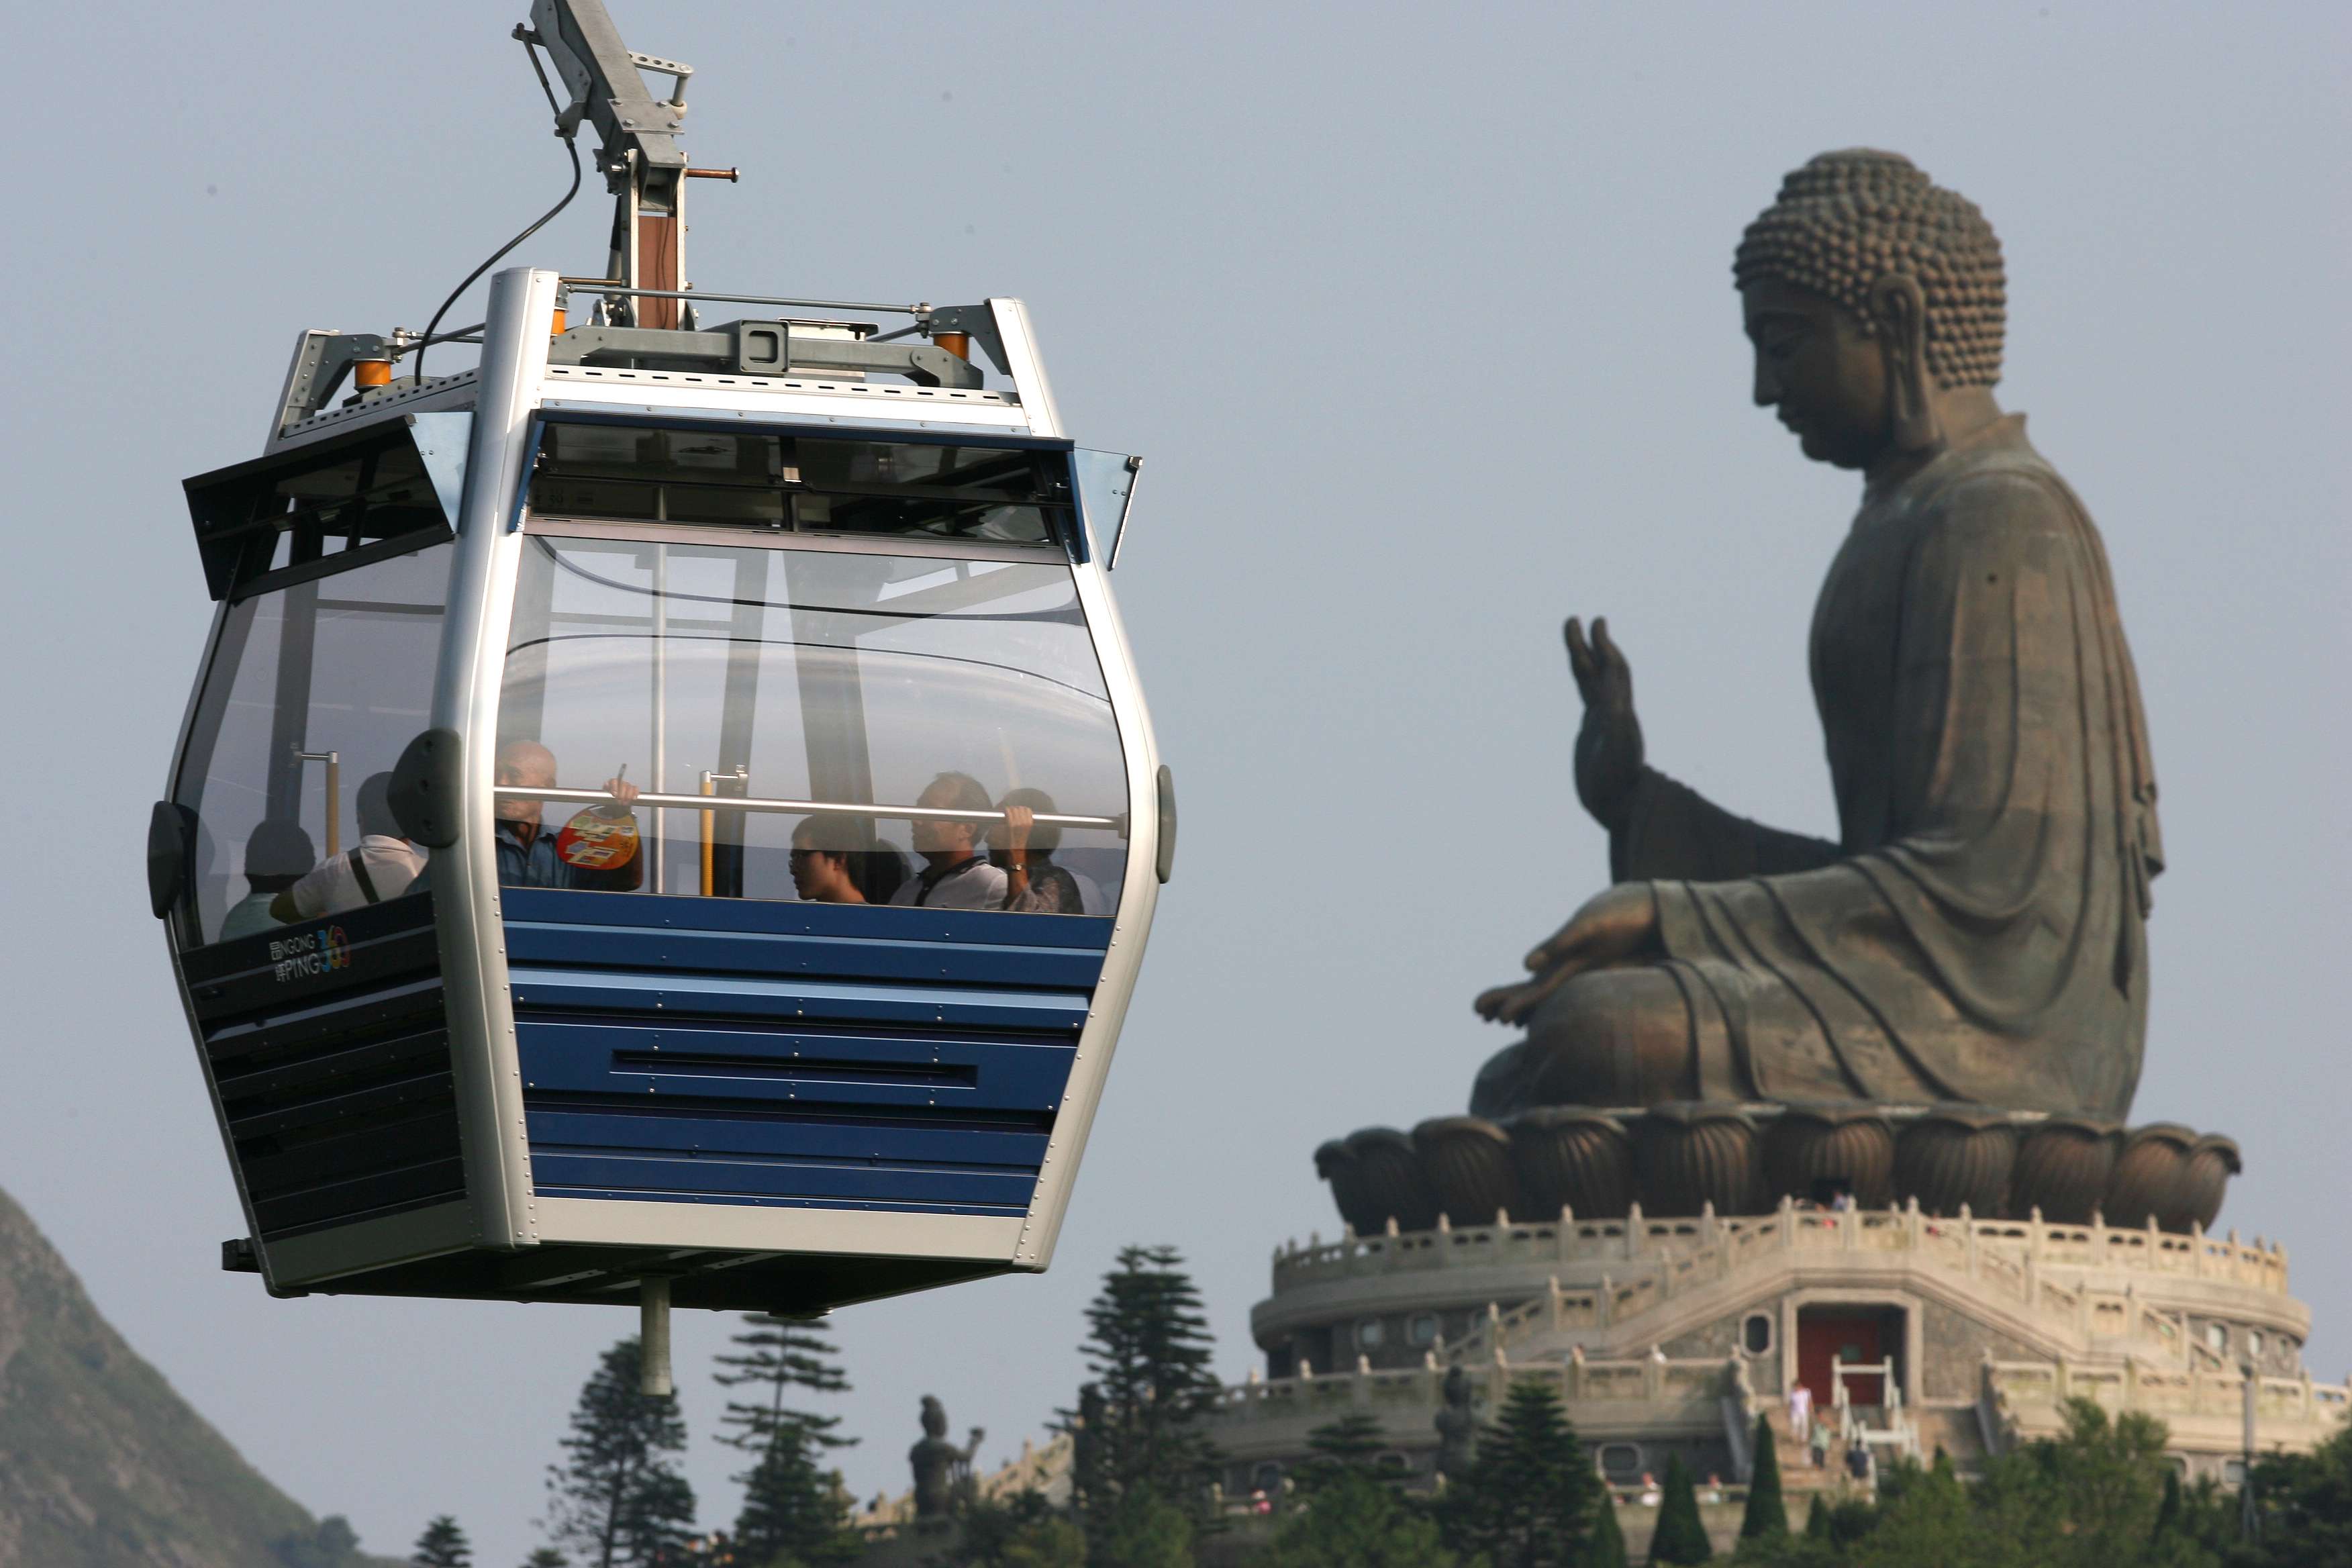 The cable car is now closed for five months to replace cables. Photo: Robert Ng